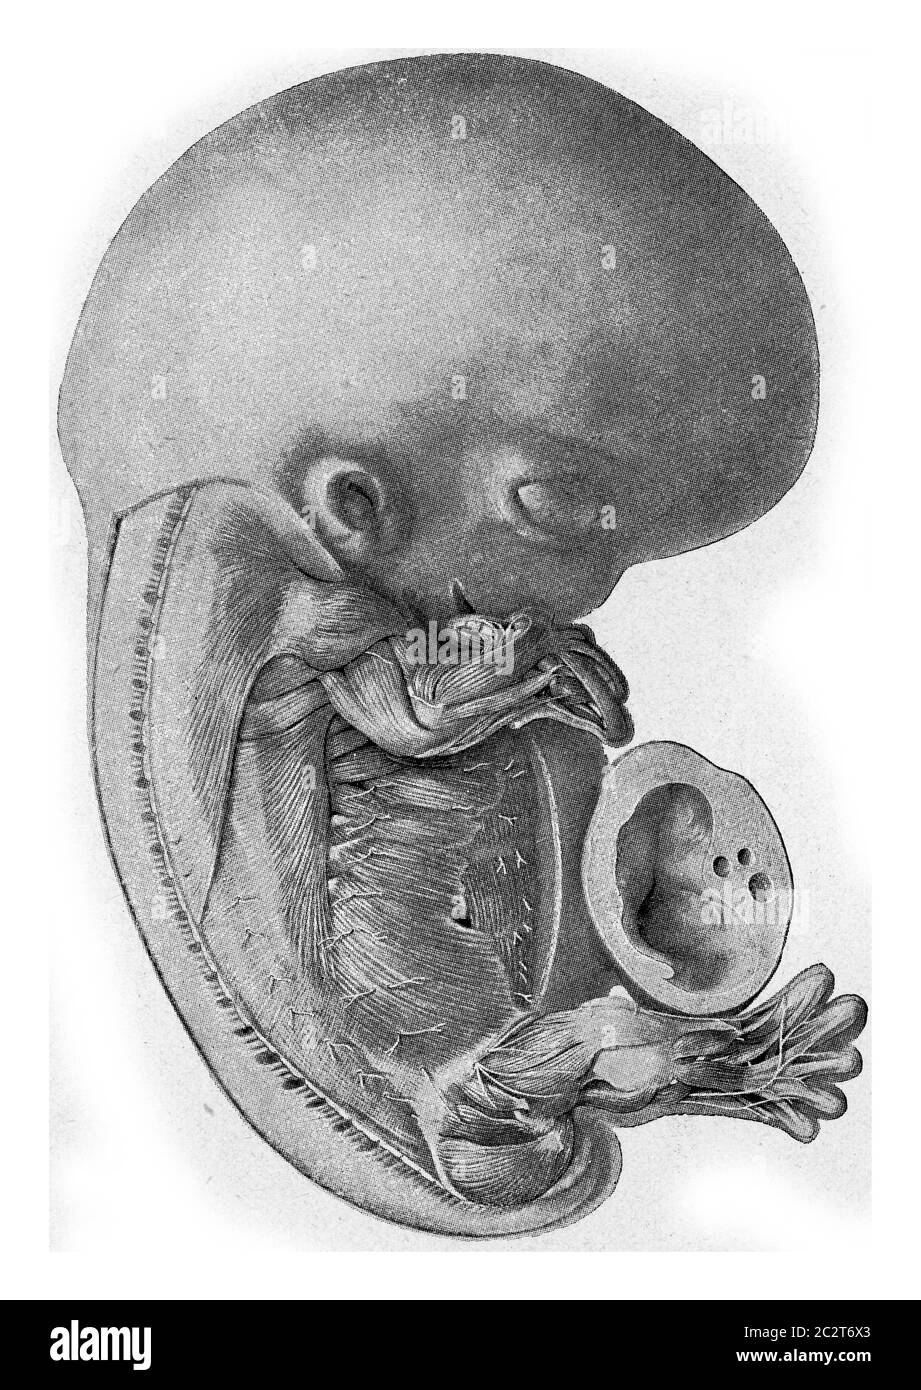 Human embryo, vintage engraved illustration. From the Universe and Humanity, 1910. Stock Photo